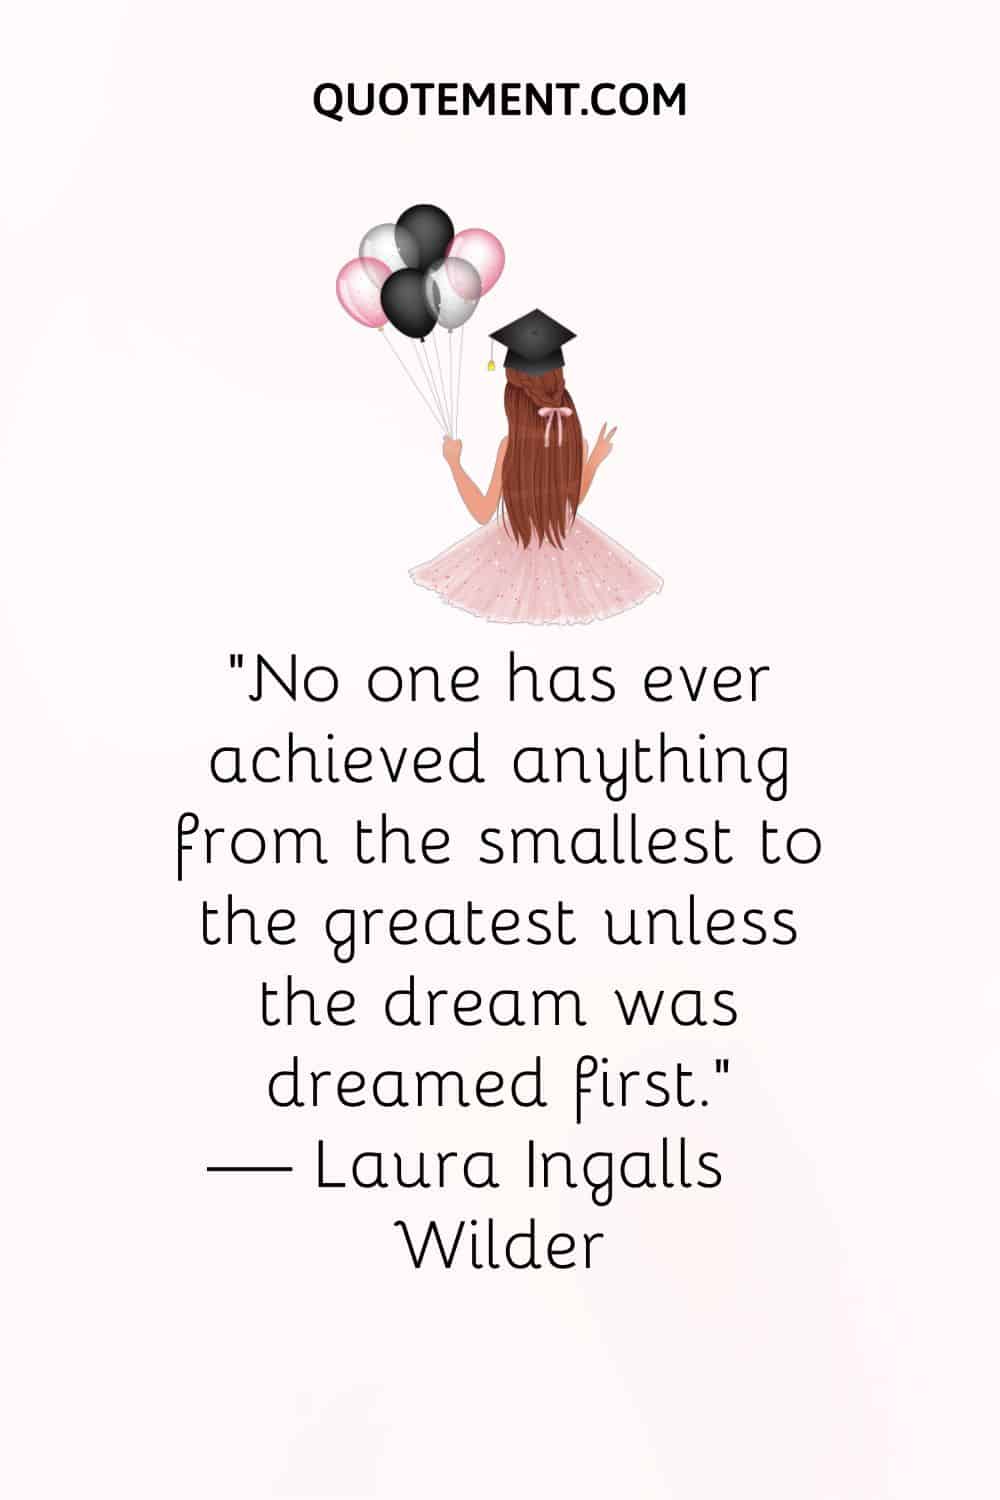 graduate girl carrying balloons image representing achieving dreams quote